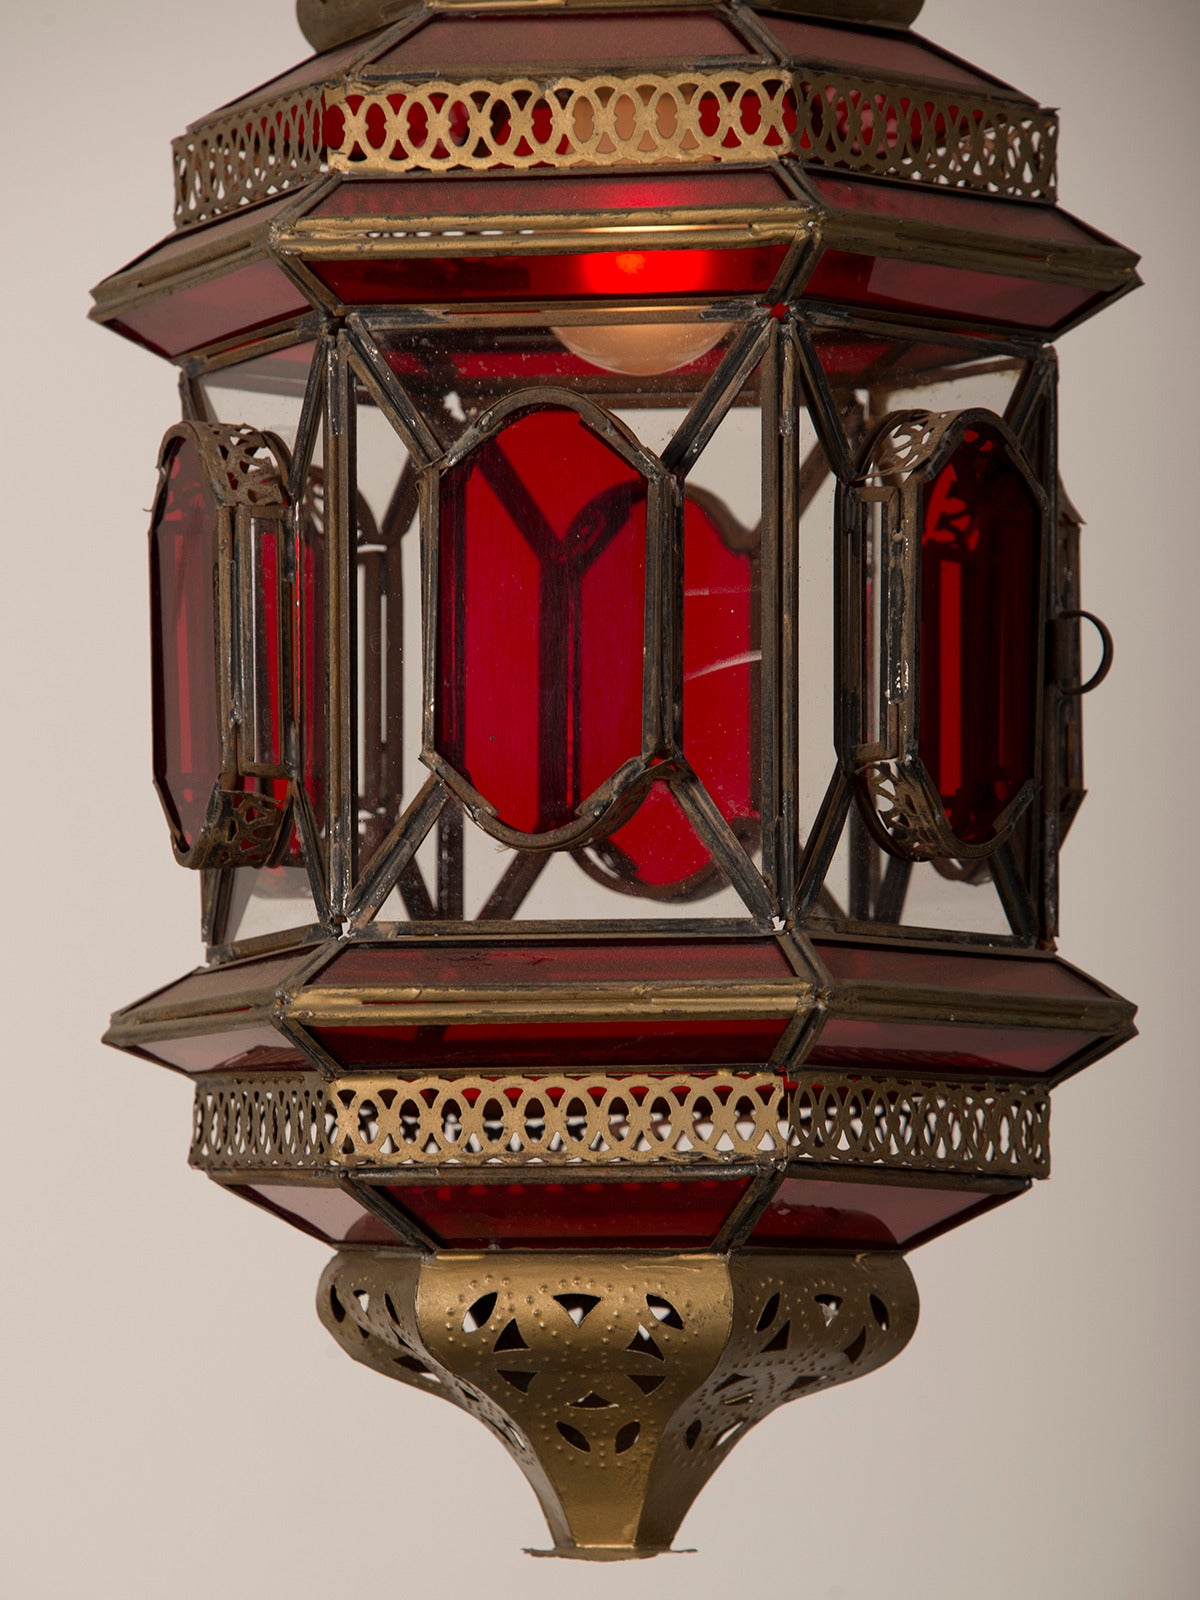 Mid-20th Century Moroccan Lantern circa 1940 Enclosing Ruby and Clear Glass with Filigreed Brass